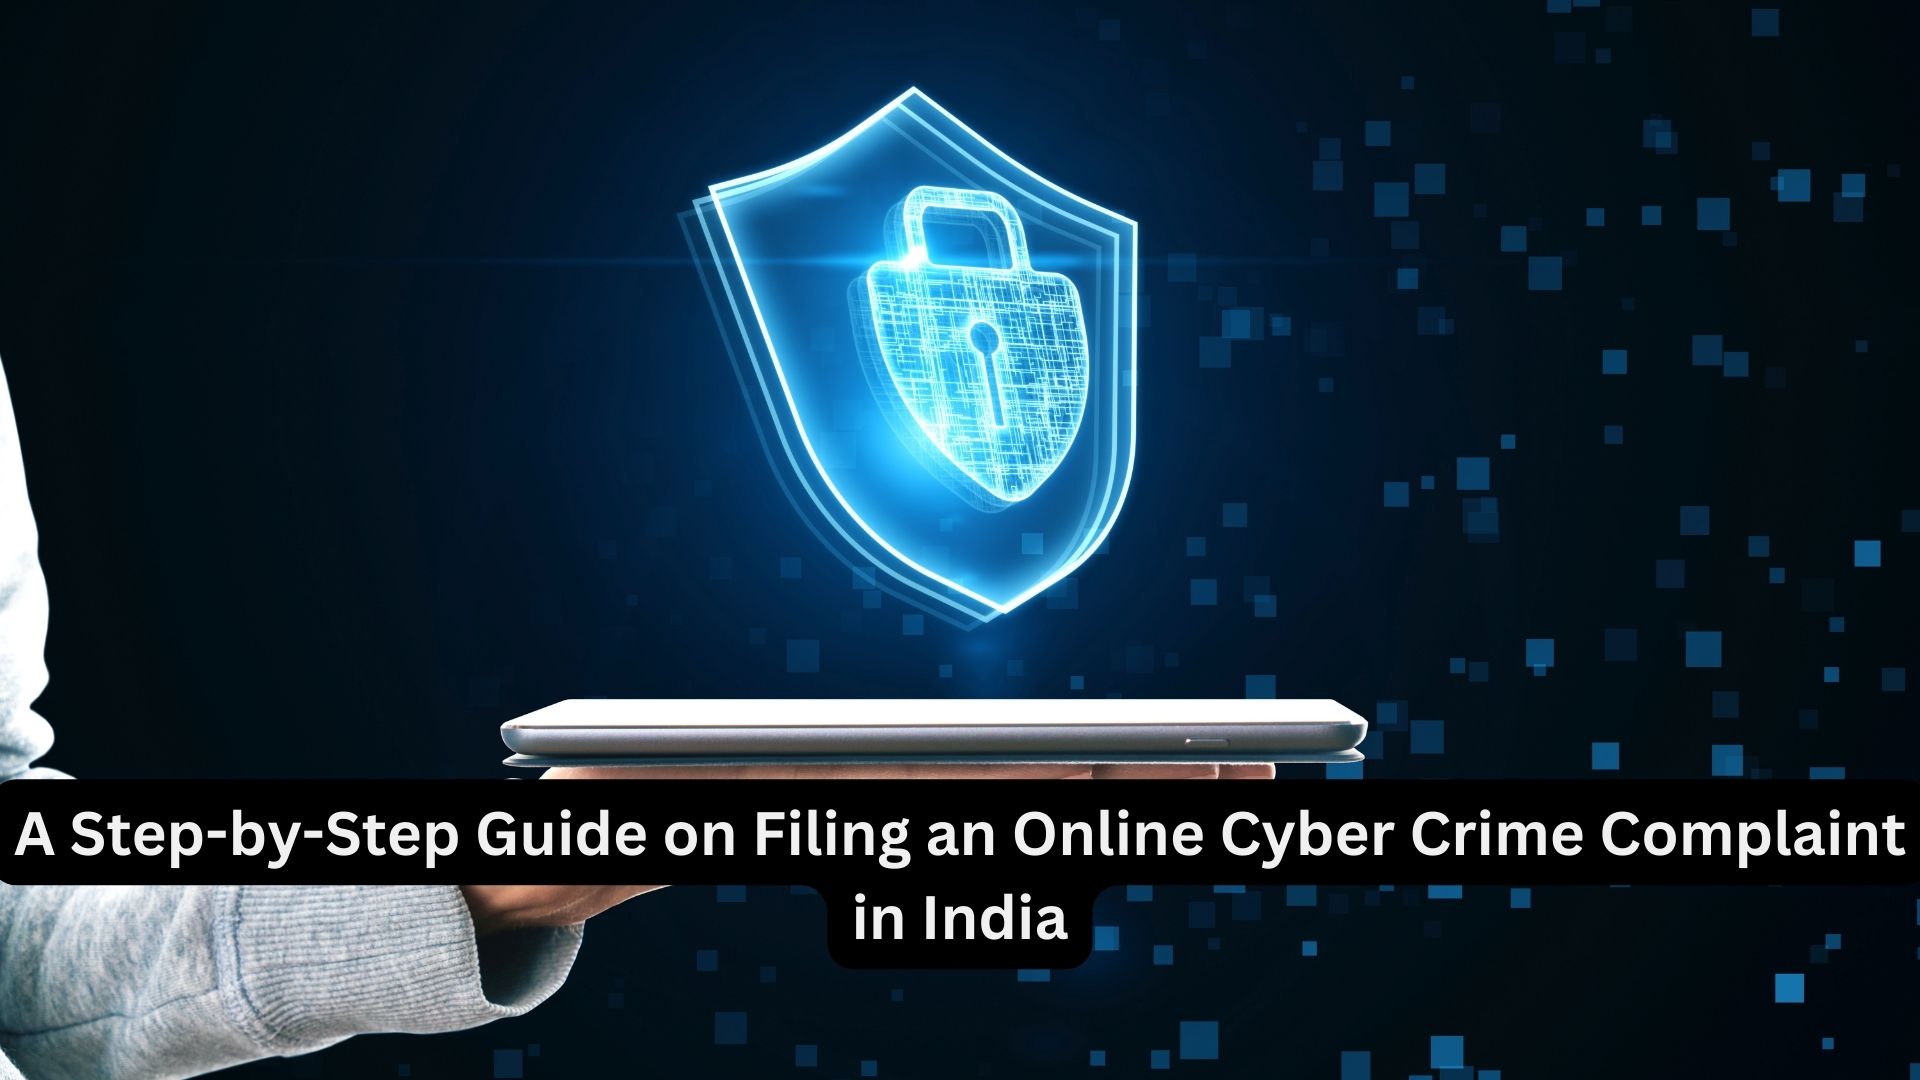 A Step-by-Step Guide on Filing an Online Cyber Crime Complaint in India